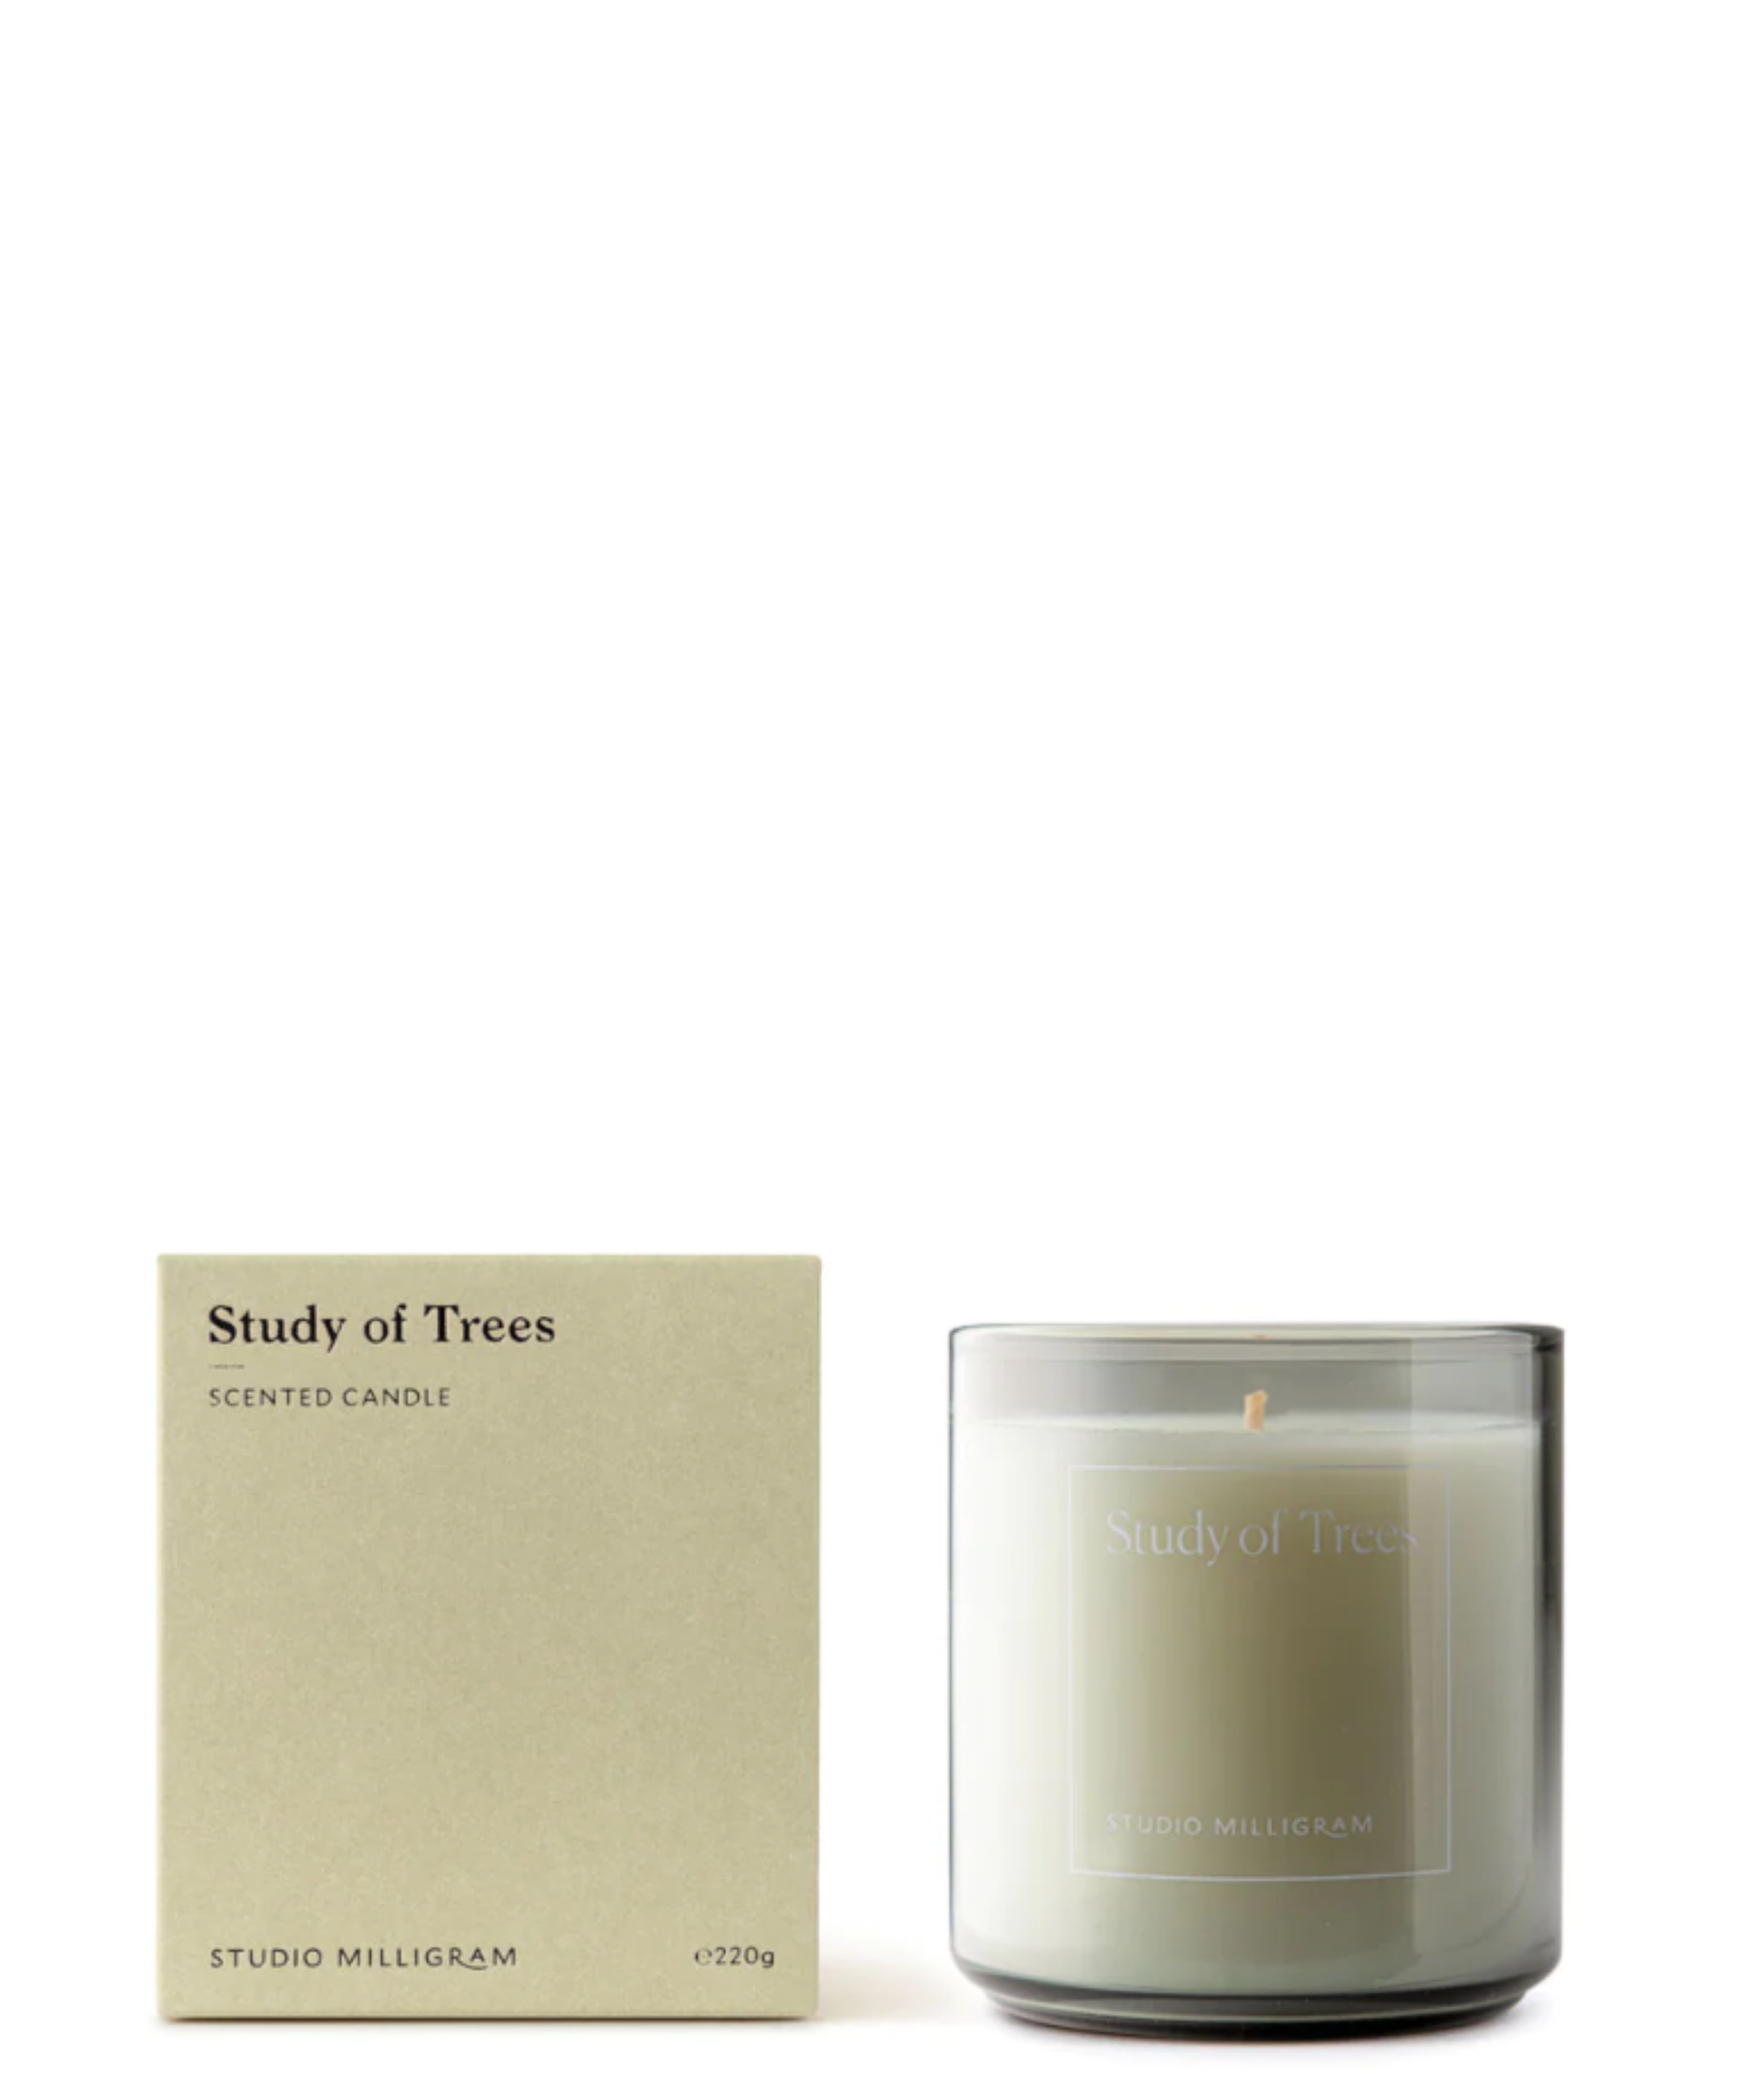 Scented Candle - Study of Trees